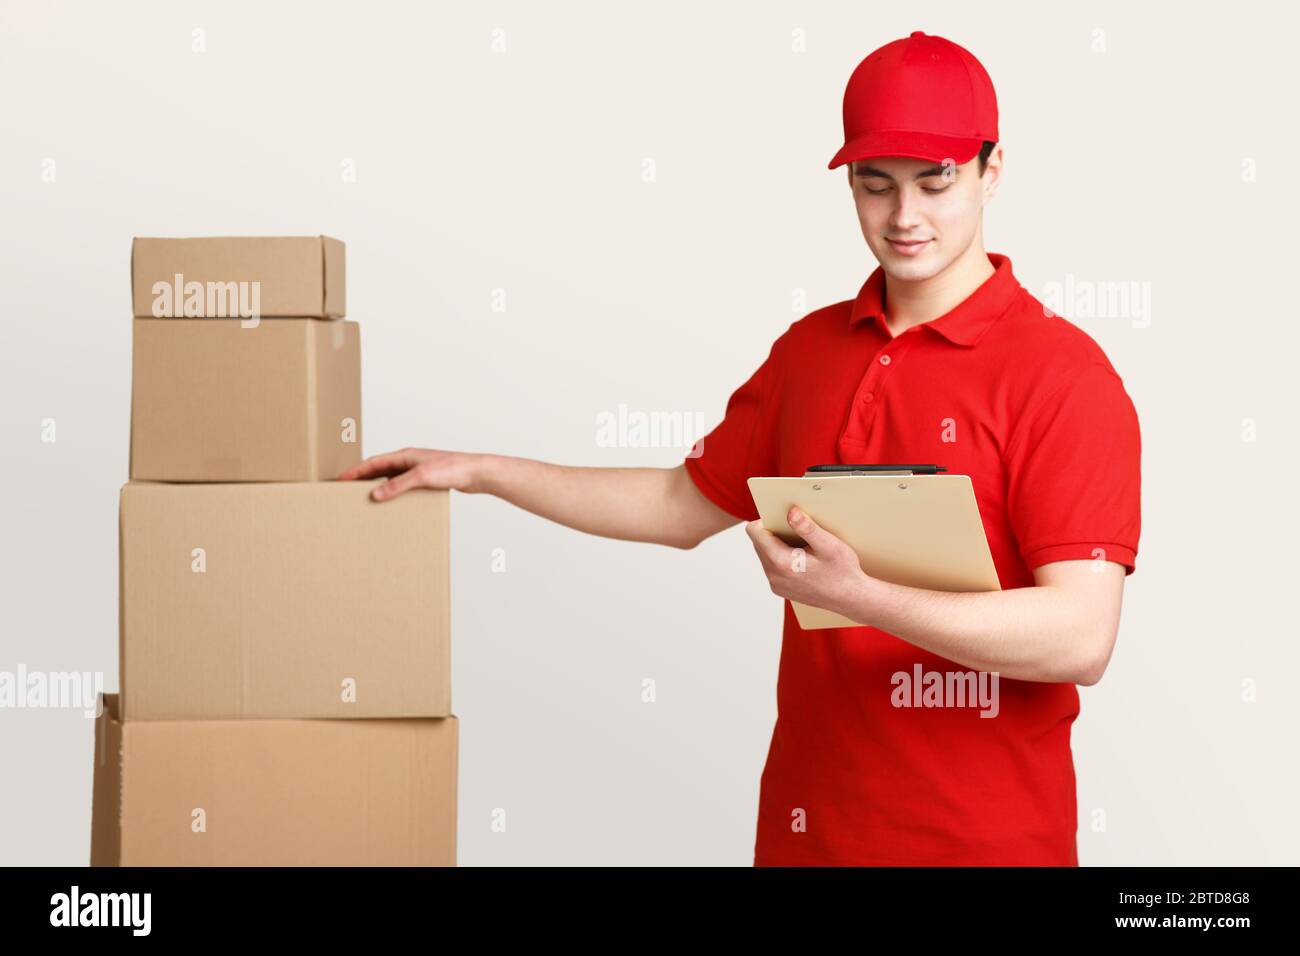 Postman in uniform at warehouse checks for presence of all parcels, holding tablet in hands Stock Photo